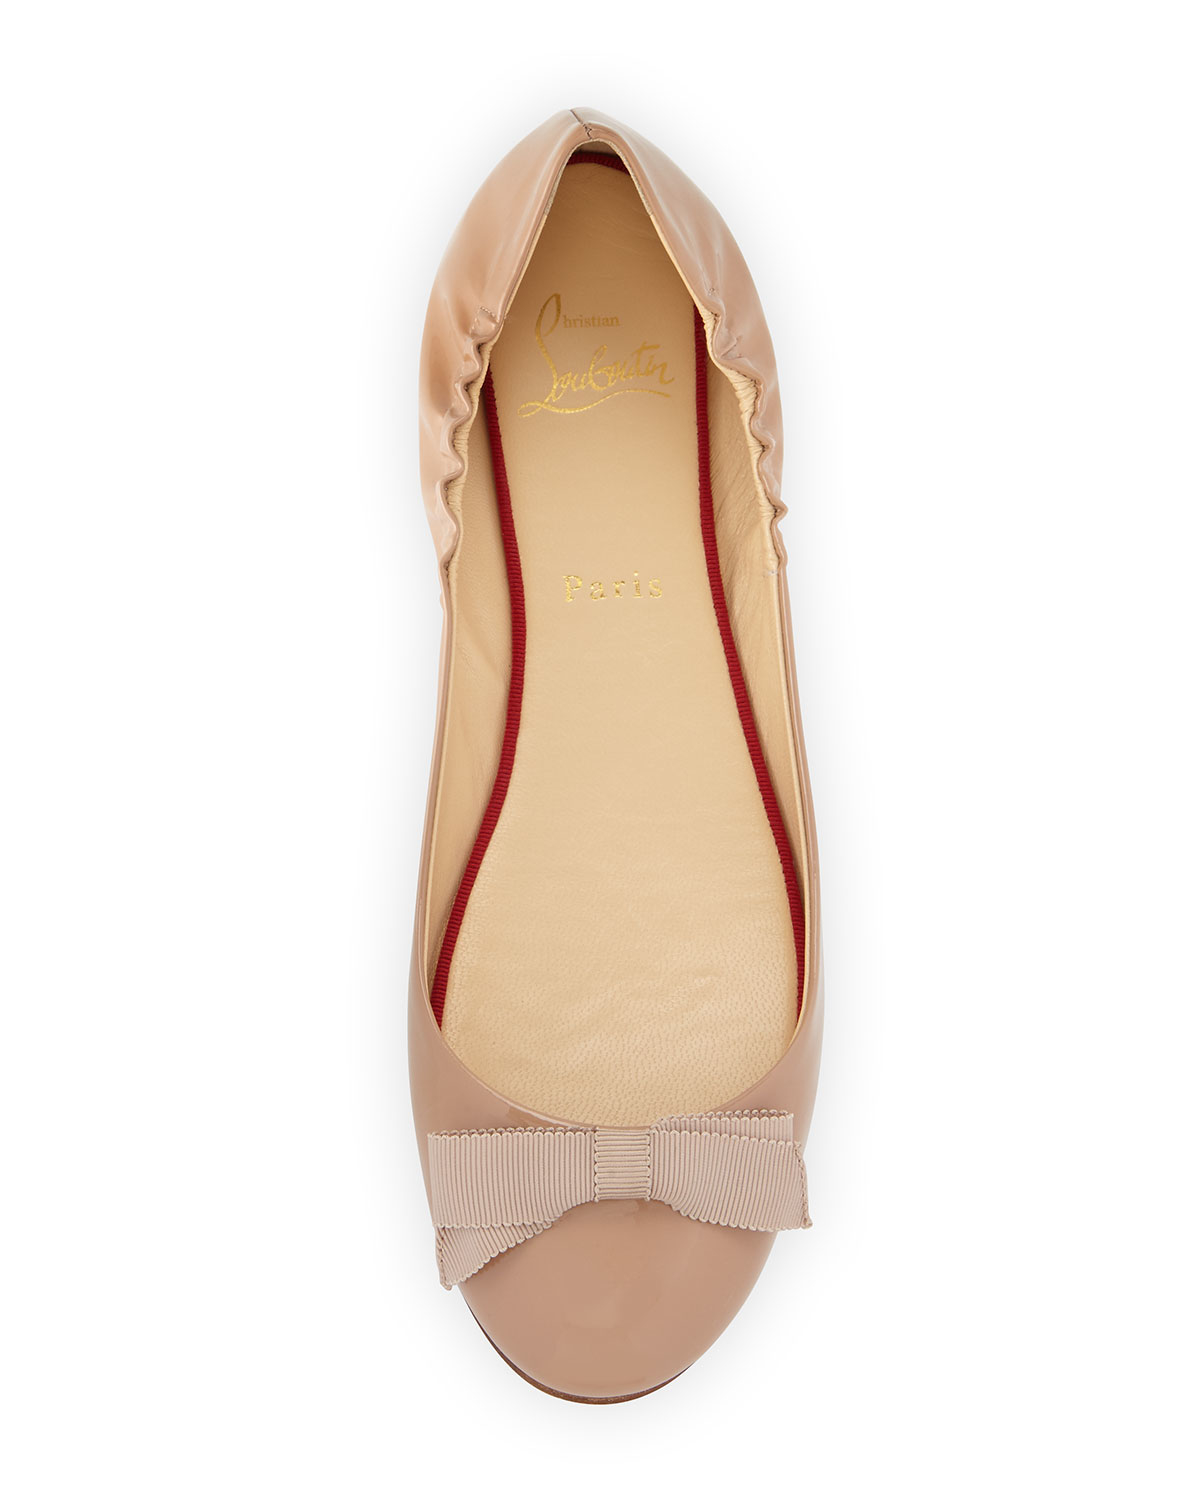 Christian louboutin Gloriana Patent-Leather Ballet Flats in Beige ...